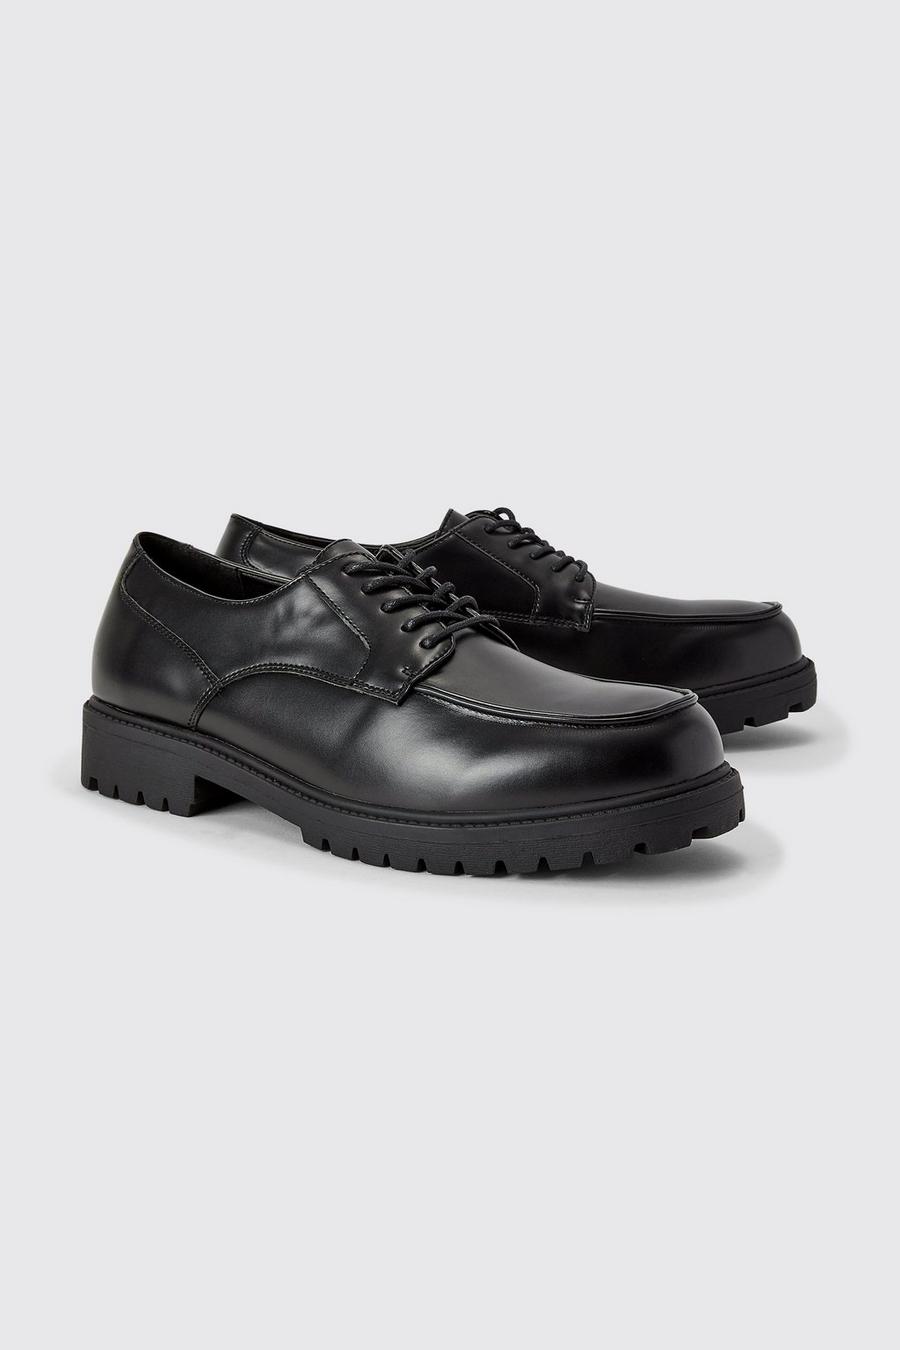 Black Chunky Sole Apron Front Shoes